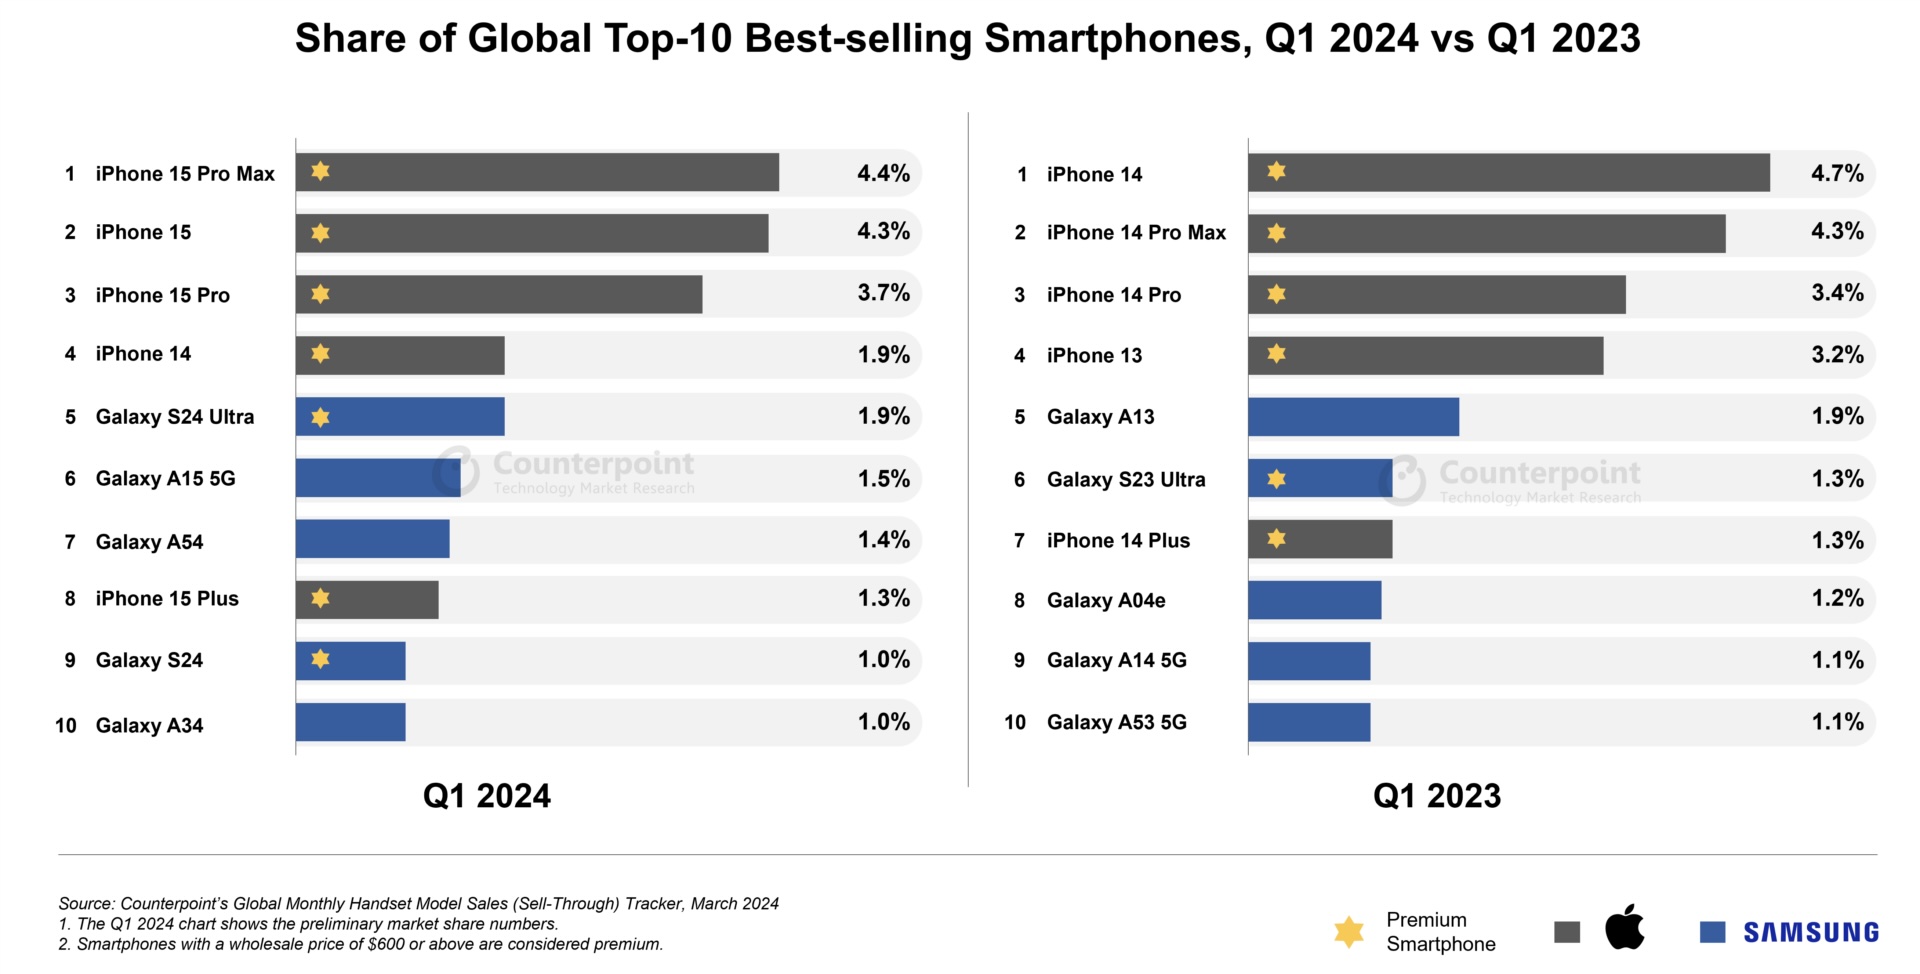 Worlds-Best-Selling-Smartphones-Q1-2024-Top-10-Counterpoint-Research.jpg